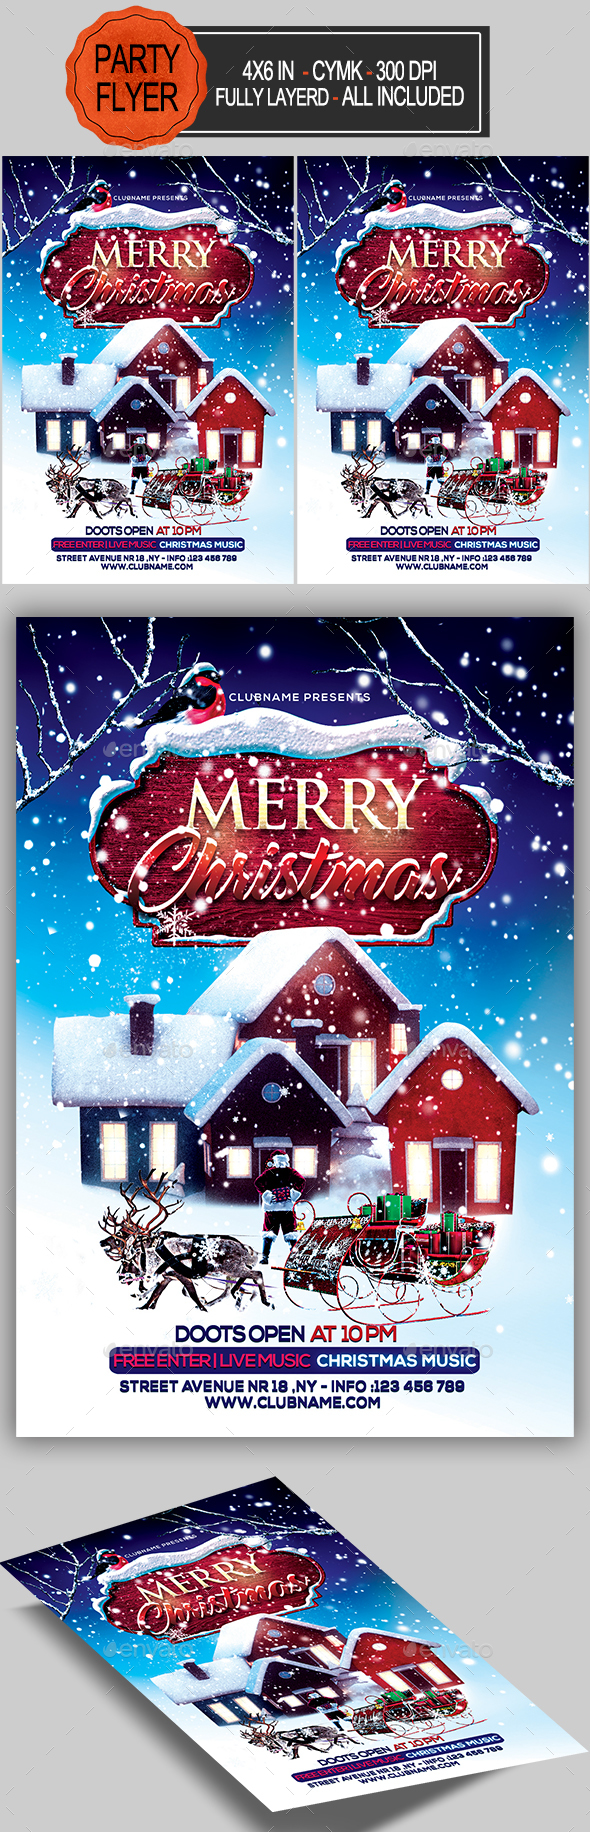 GraphicRiver Merry Christmas Flyer 20905822